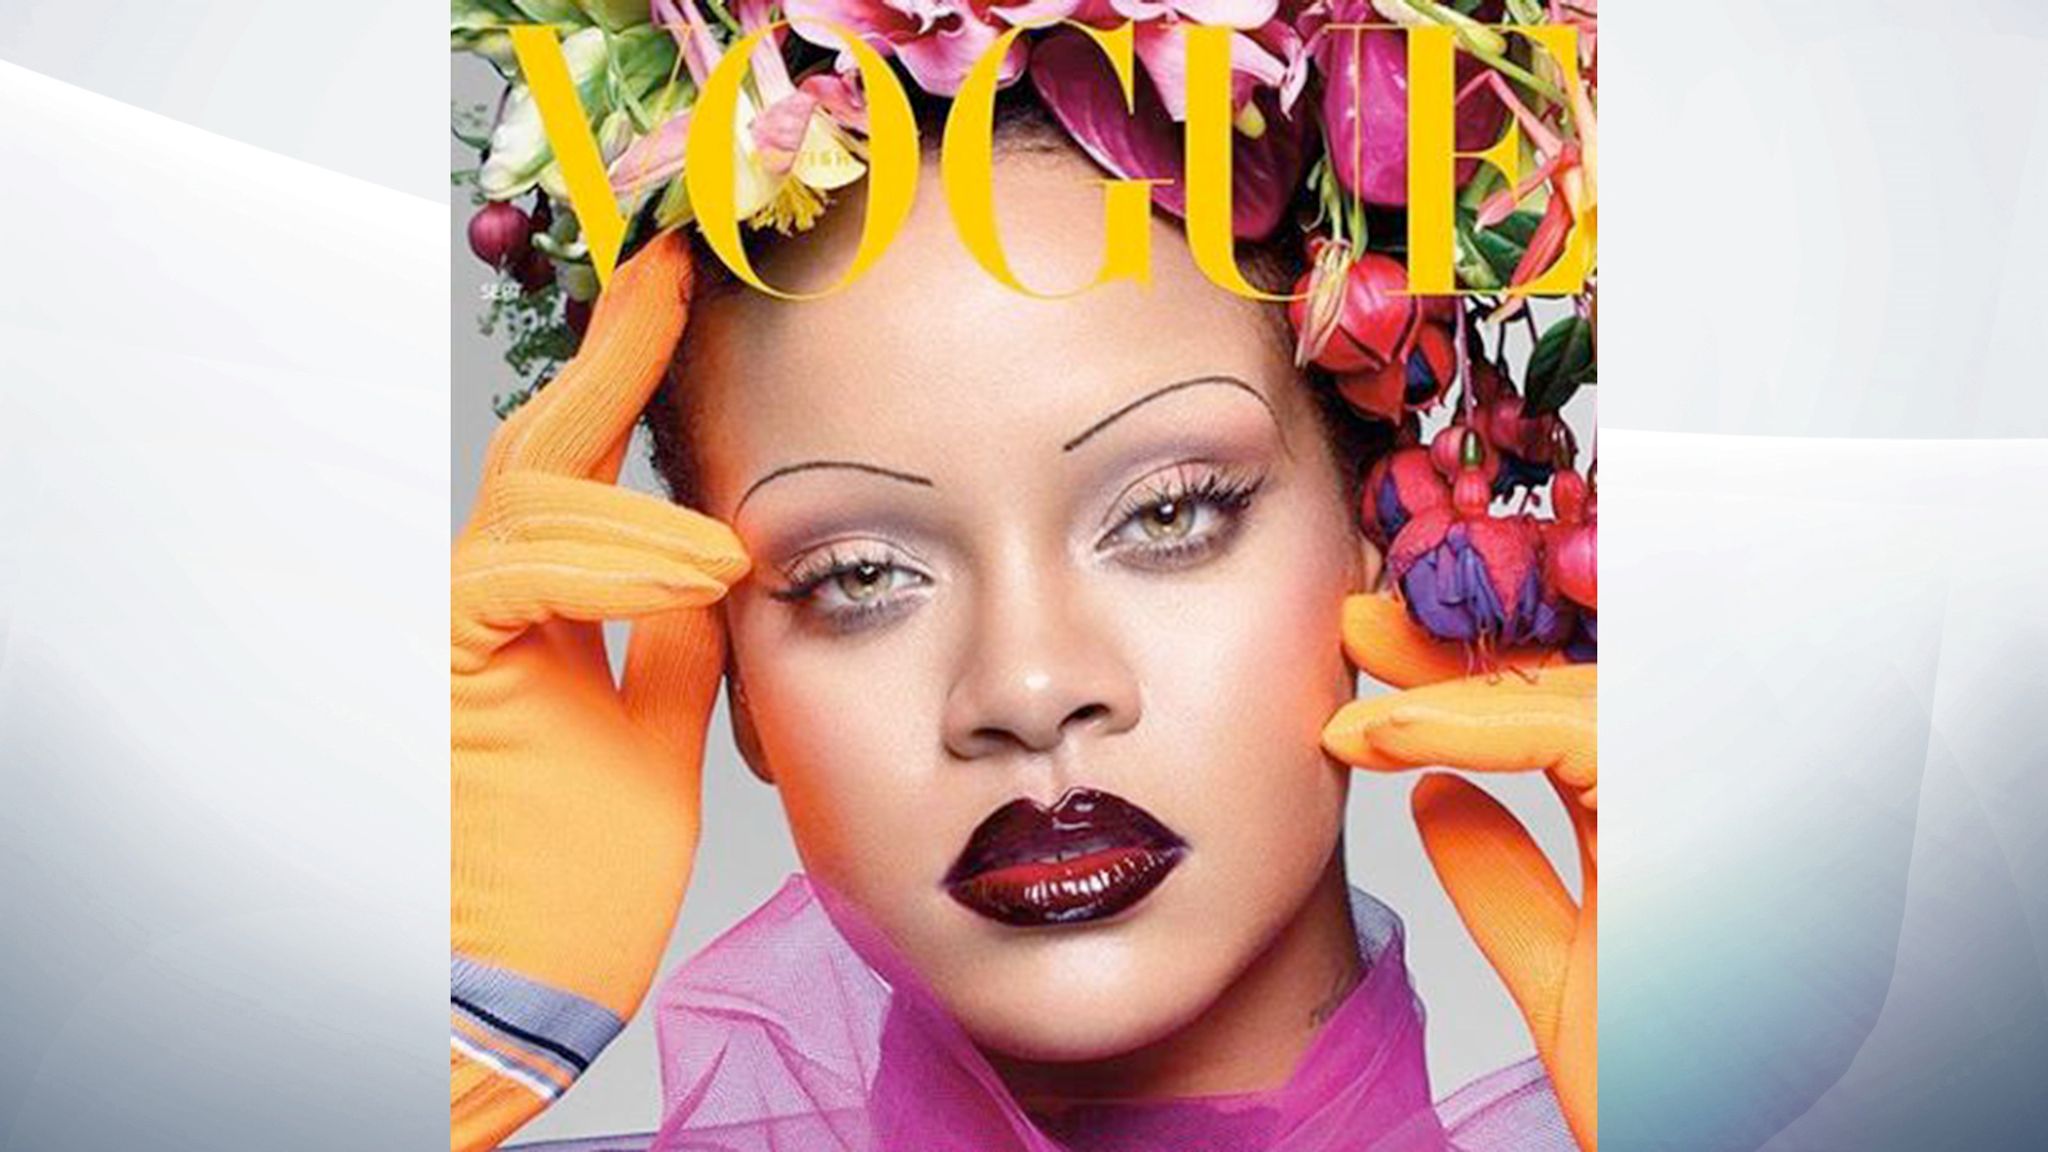 Rihanna Covers British Vogue's May 2020 Issue